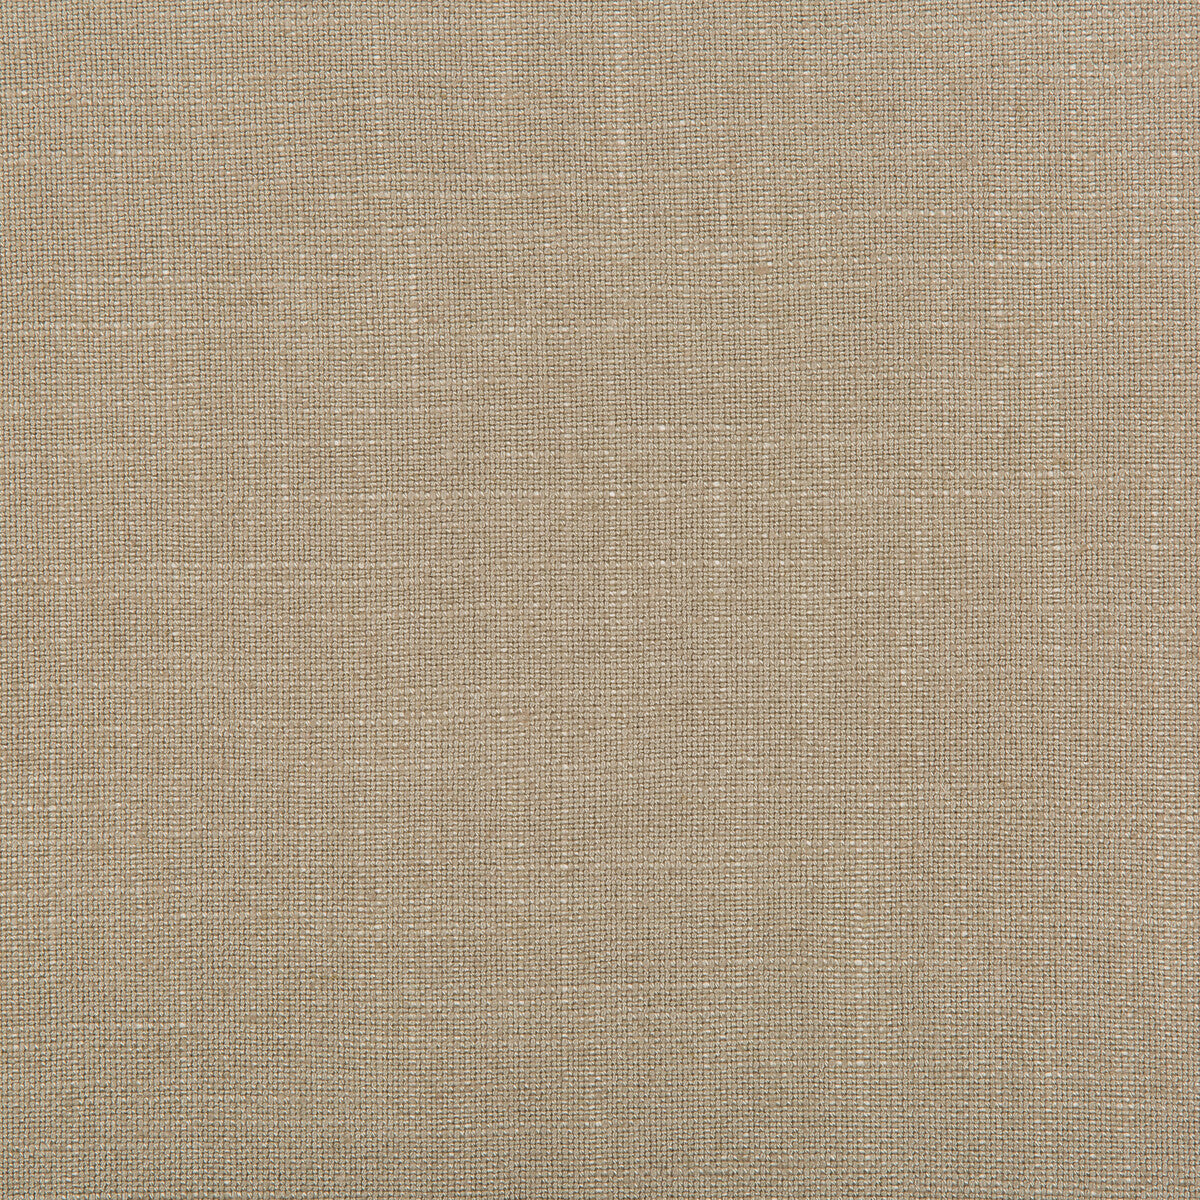 Aura fabric in driftwood color - pattern 35520.1066.0 - by Kravet Design